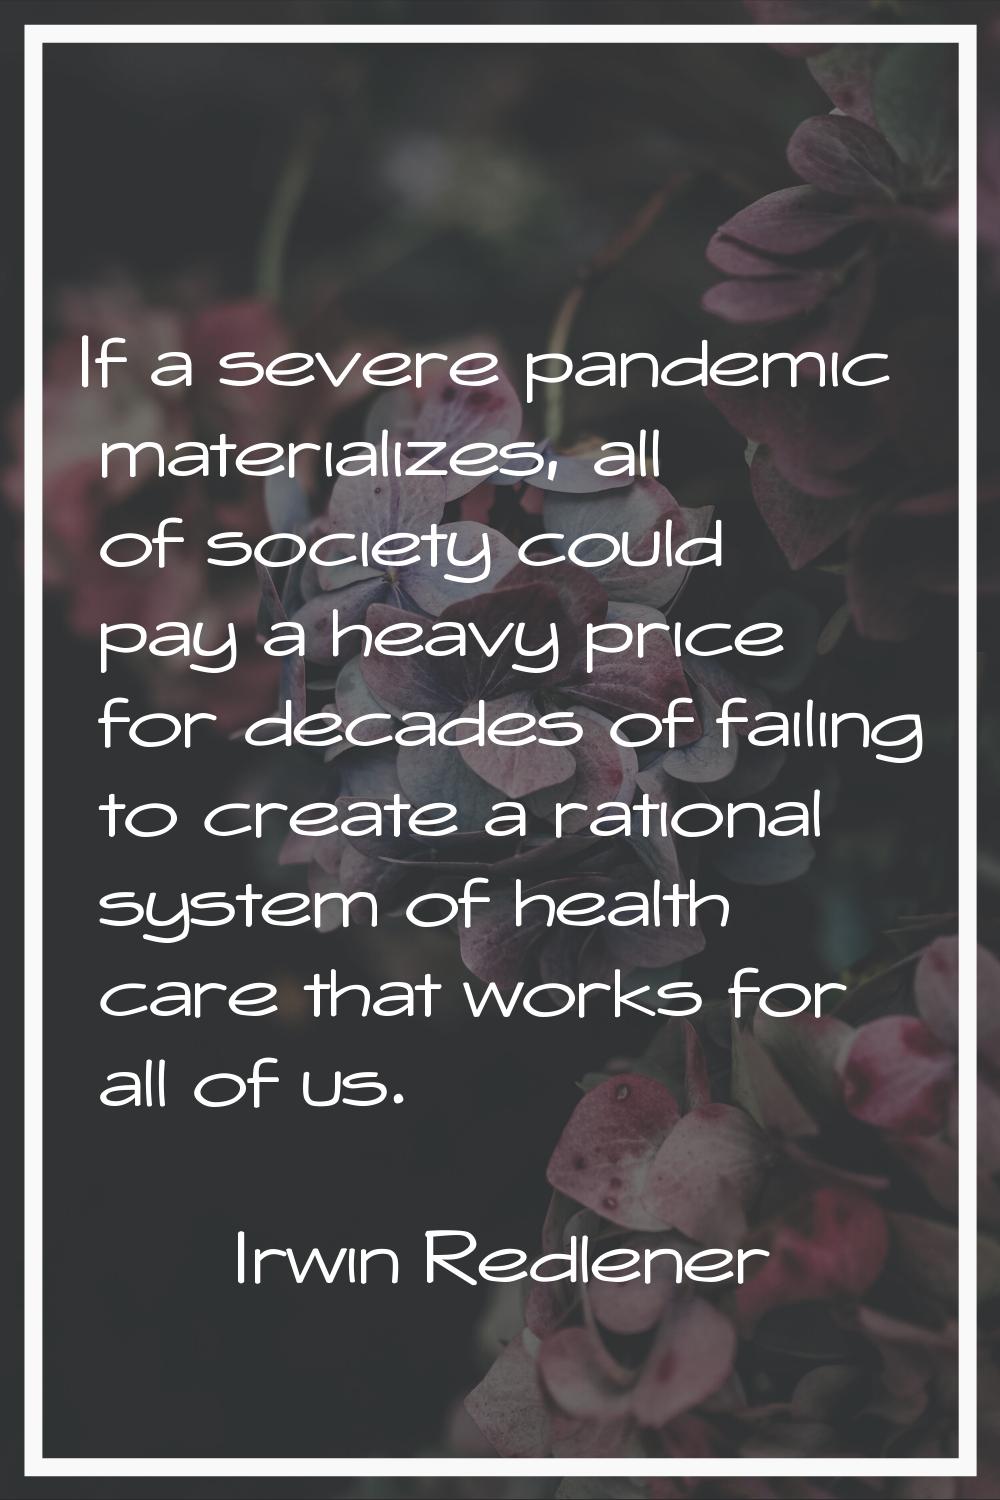 If a severe pandemic materializes, all of society could pay a heavy price for decades of failing to